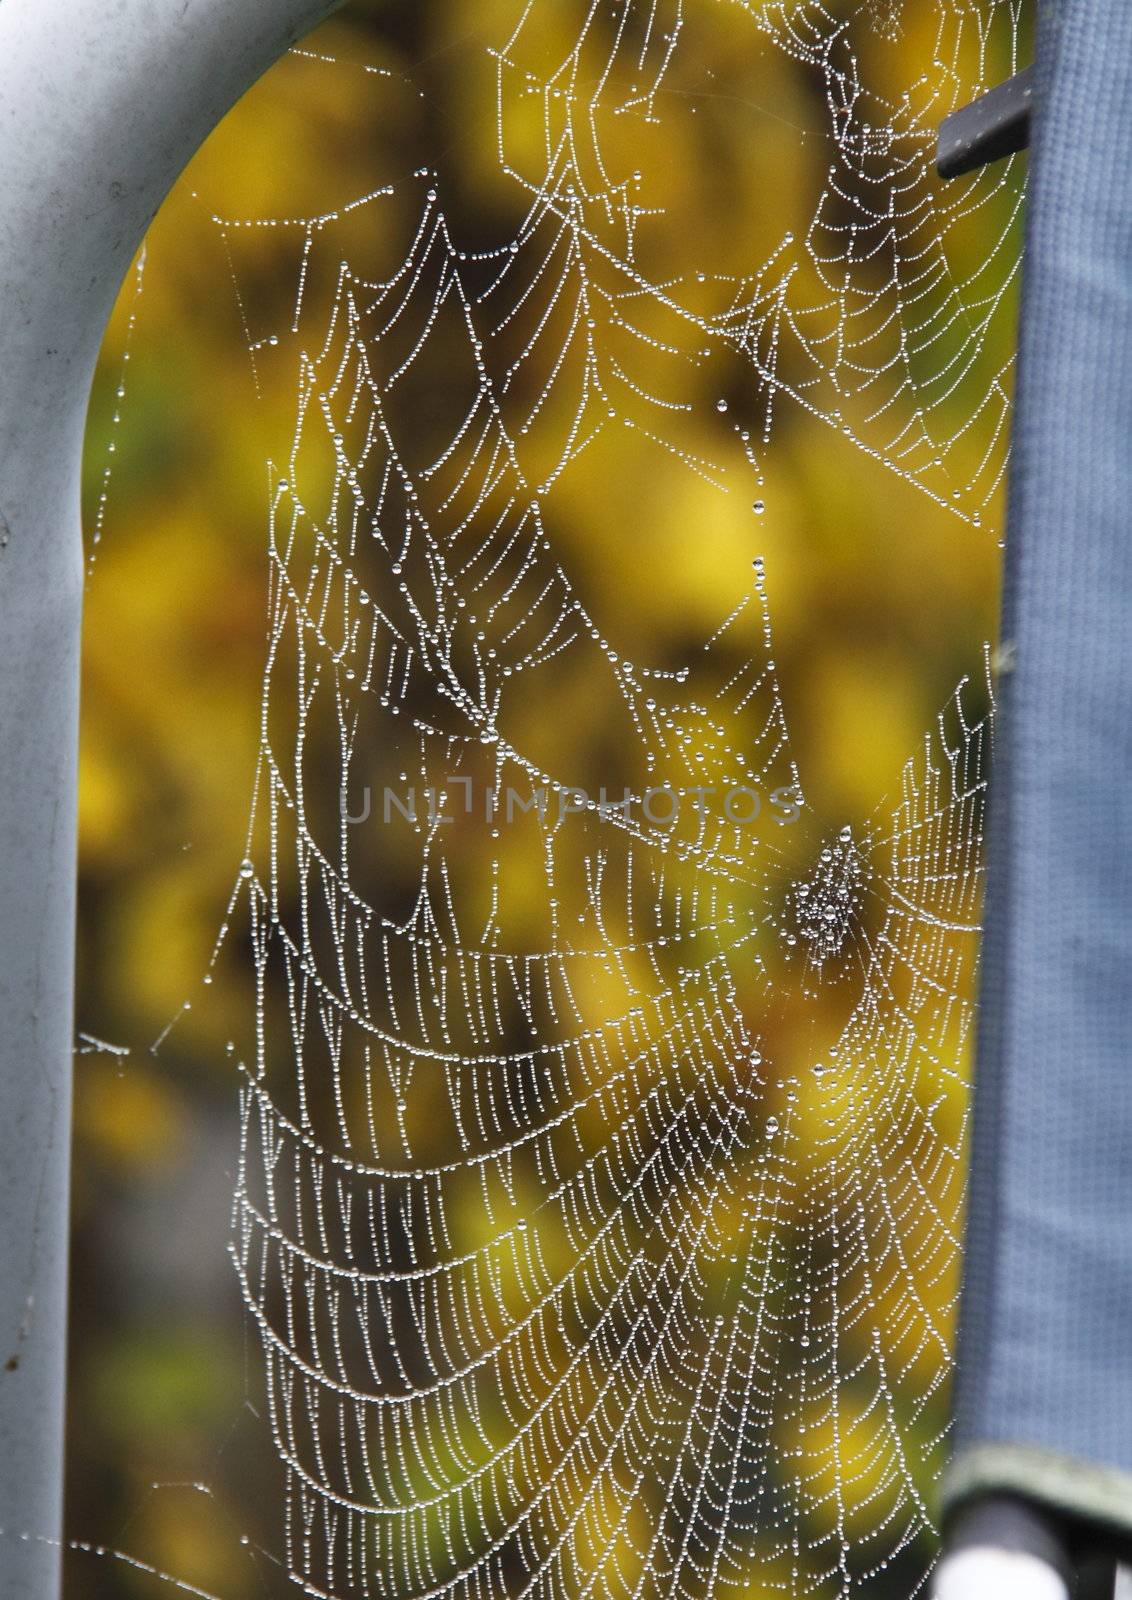 cobweb covered in dew drops from a misty morning